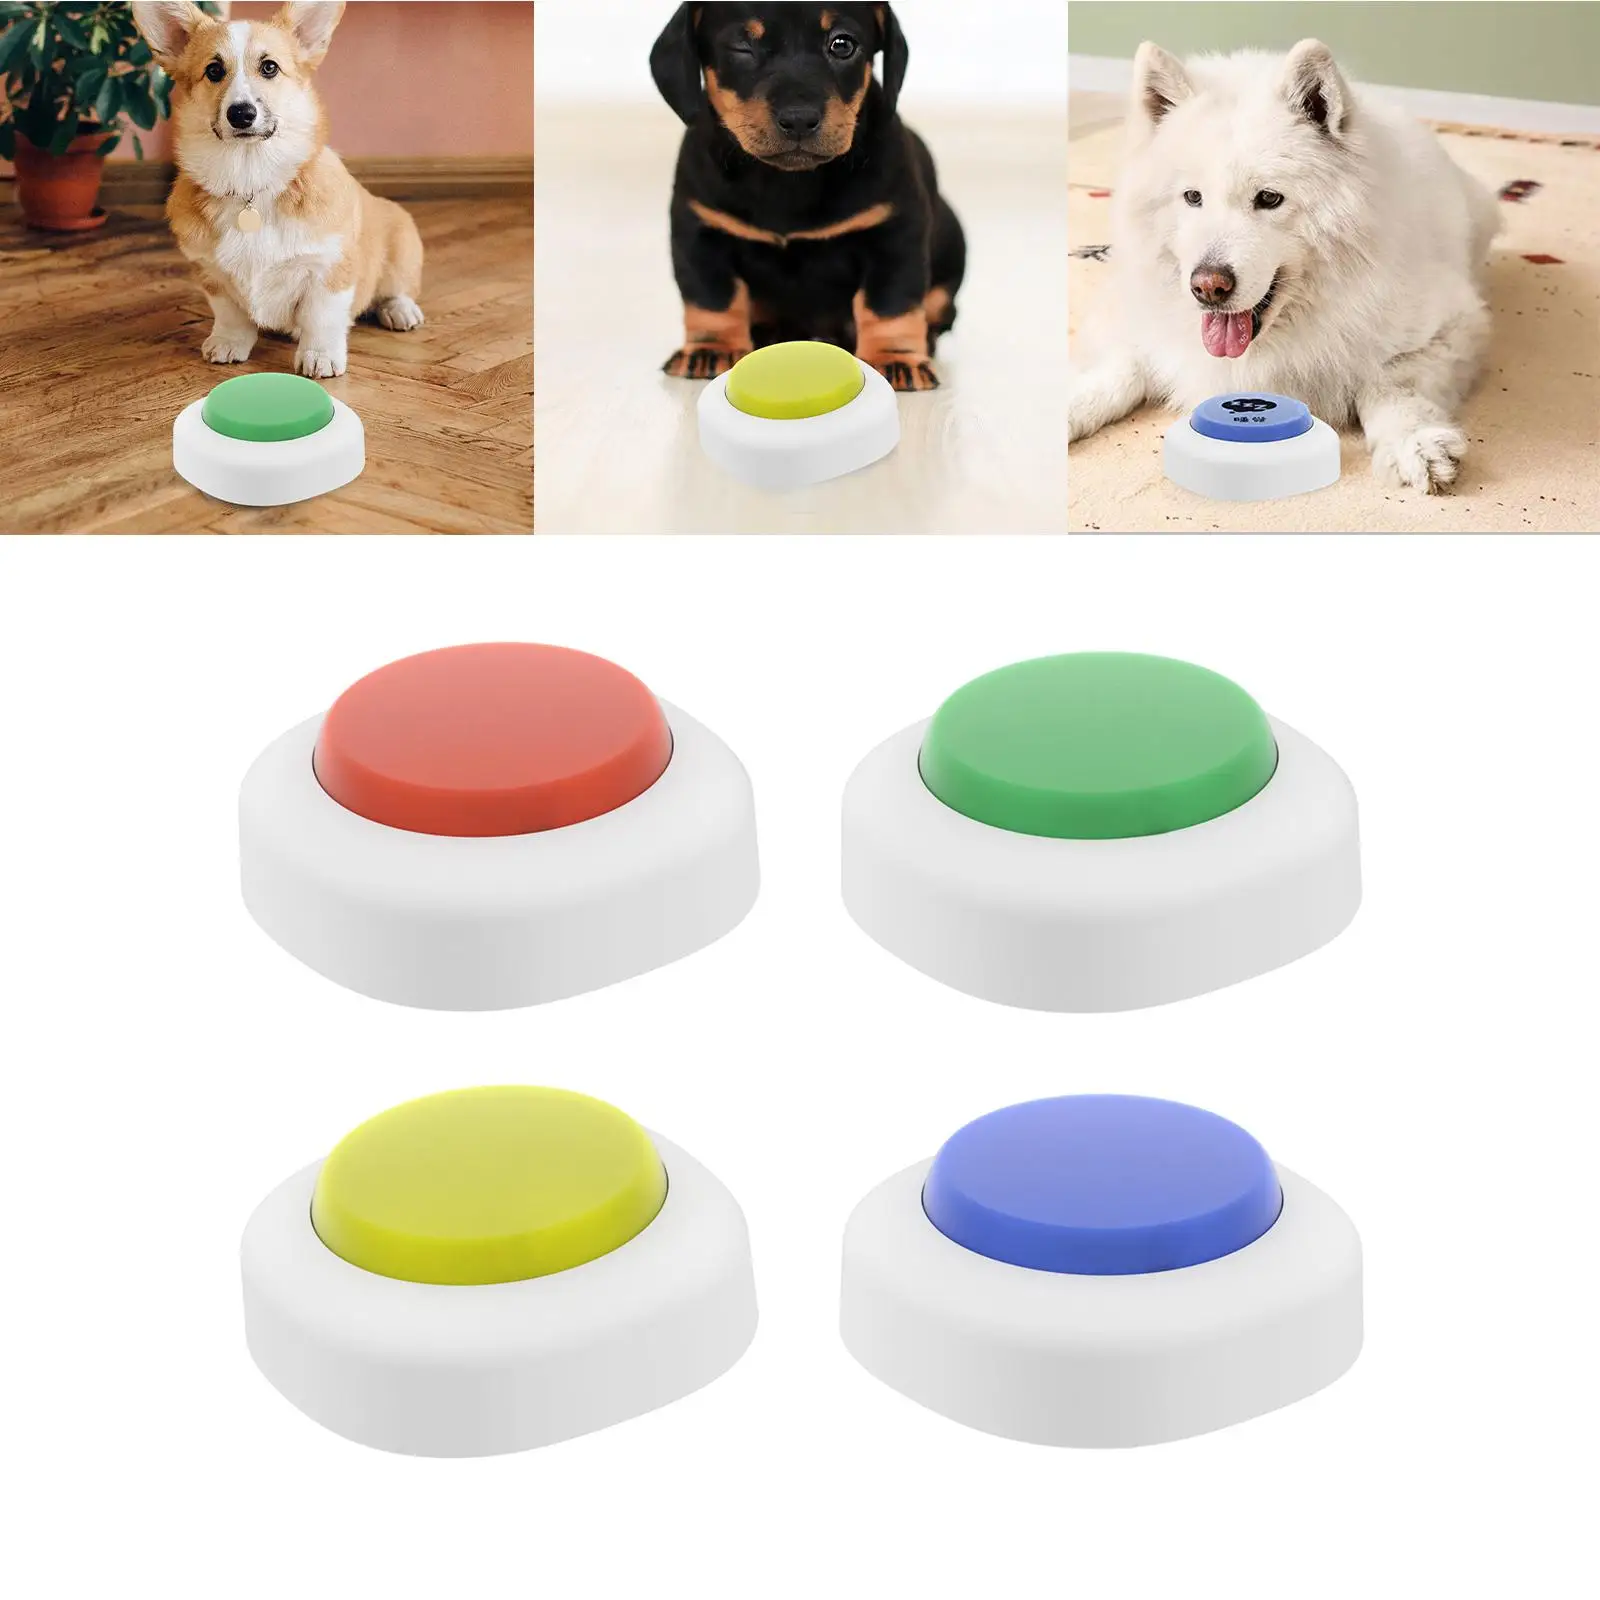 Recordable Sound Button Nonslip Bottom Communication Pet Training Interactive Toy Talking Recordable Toy Dog Training Buttons